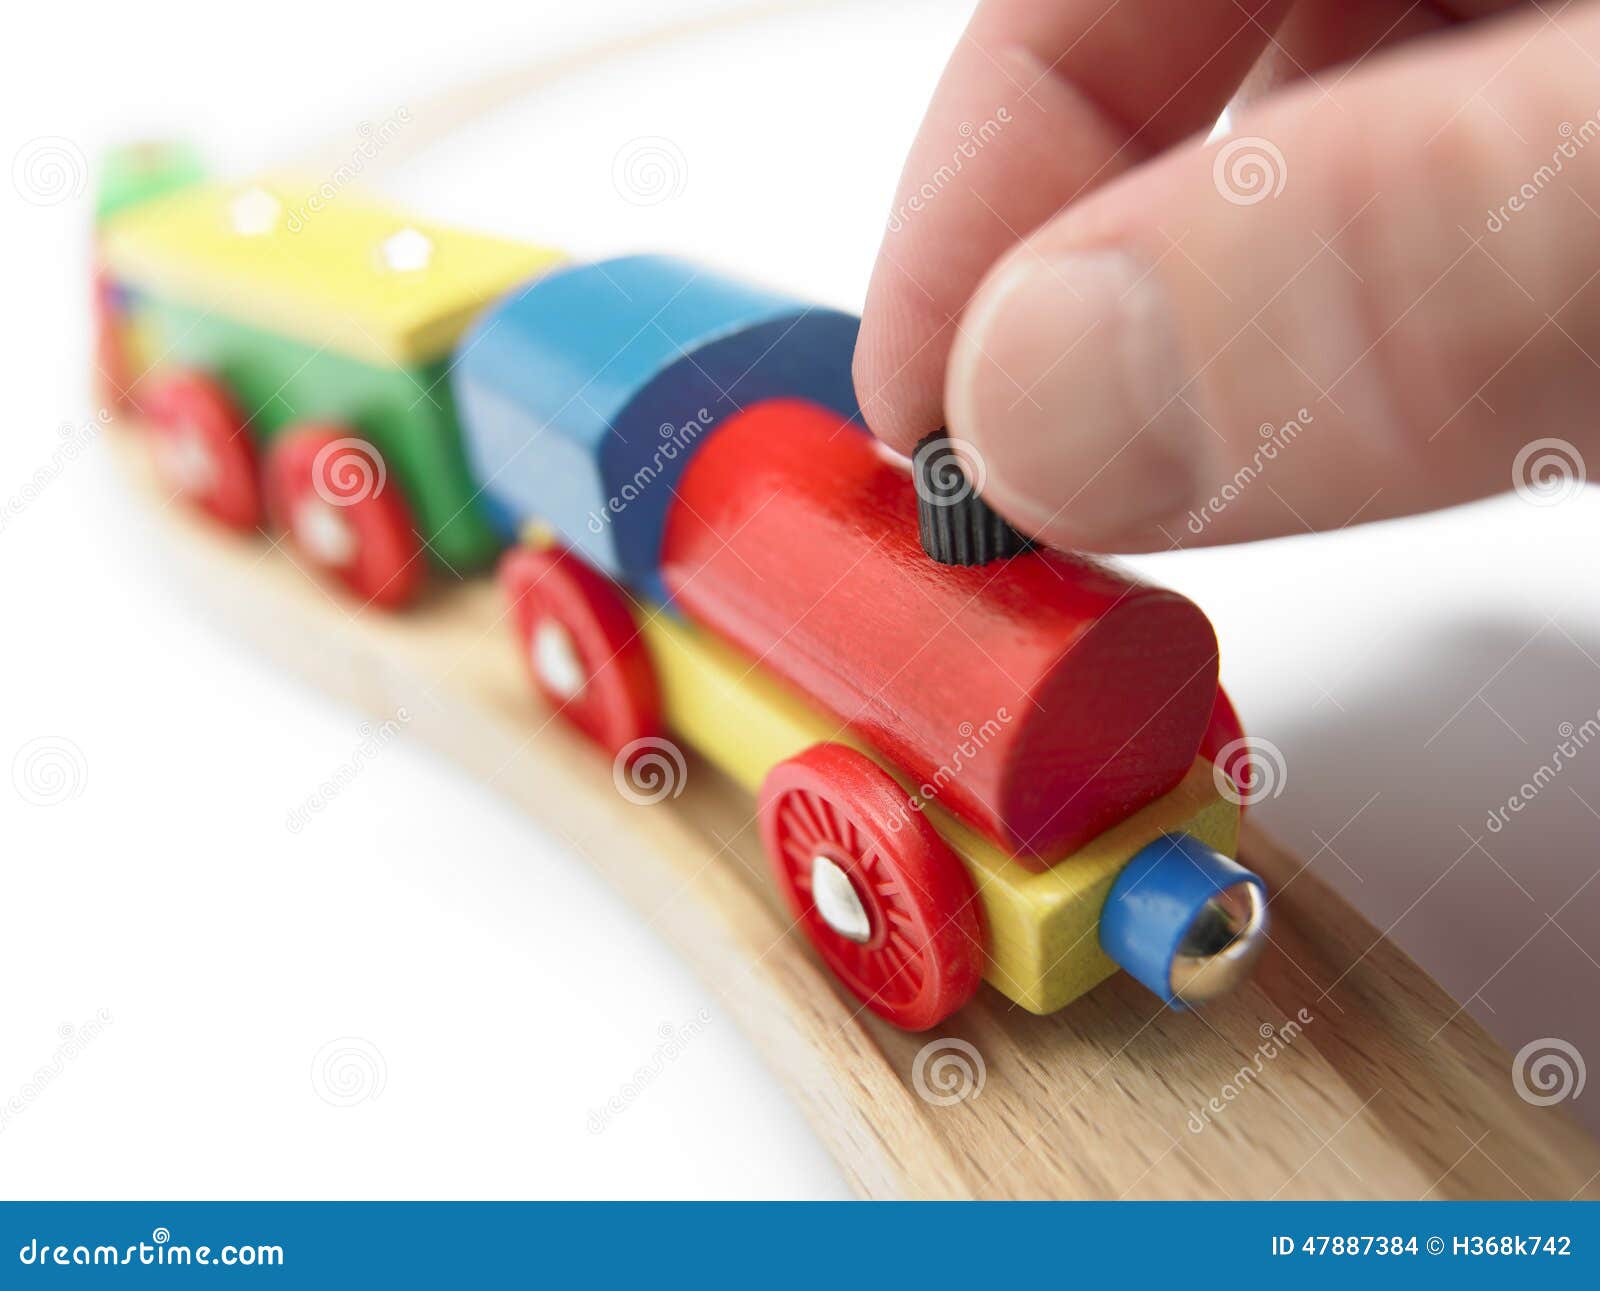 Colorful wooden toy train with hand isolated on white. Horizontal